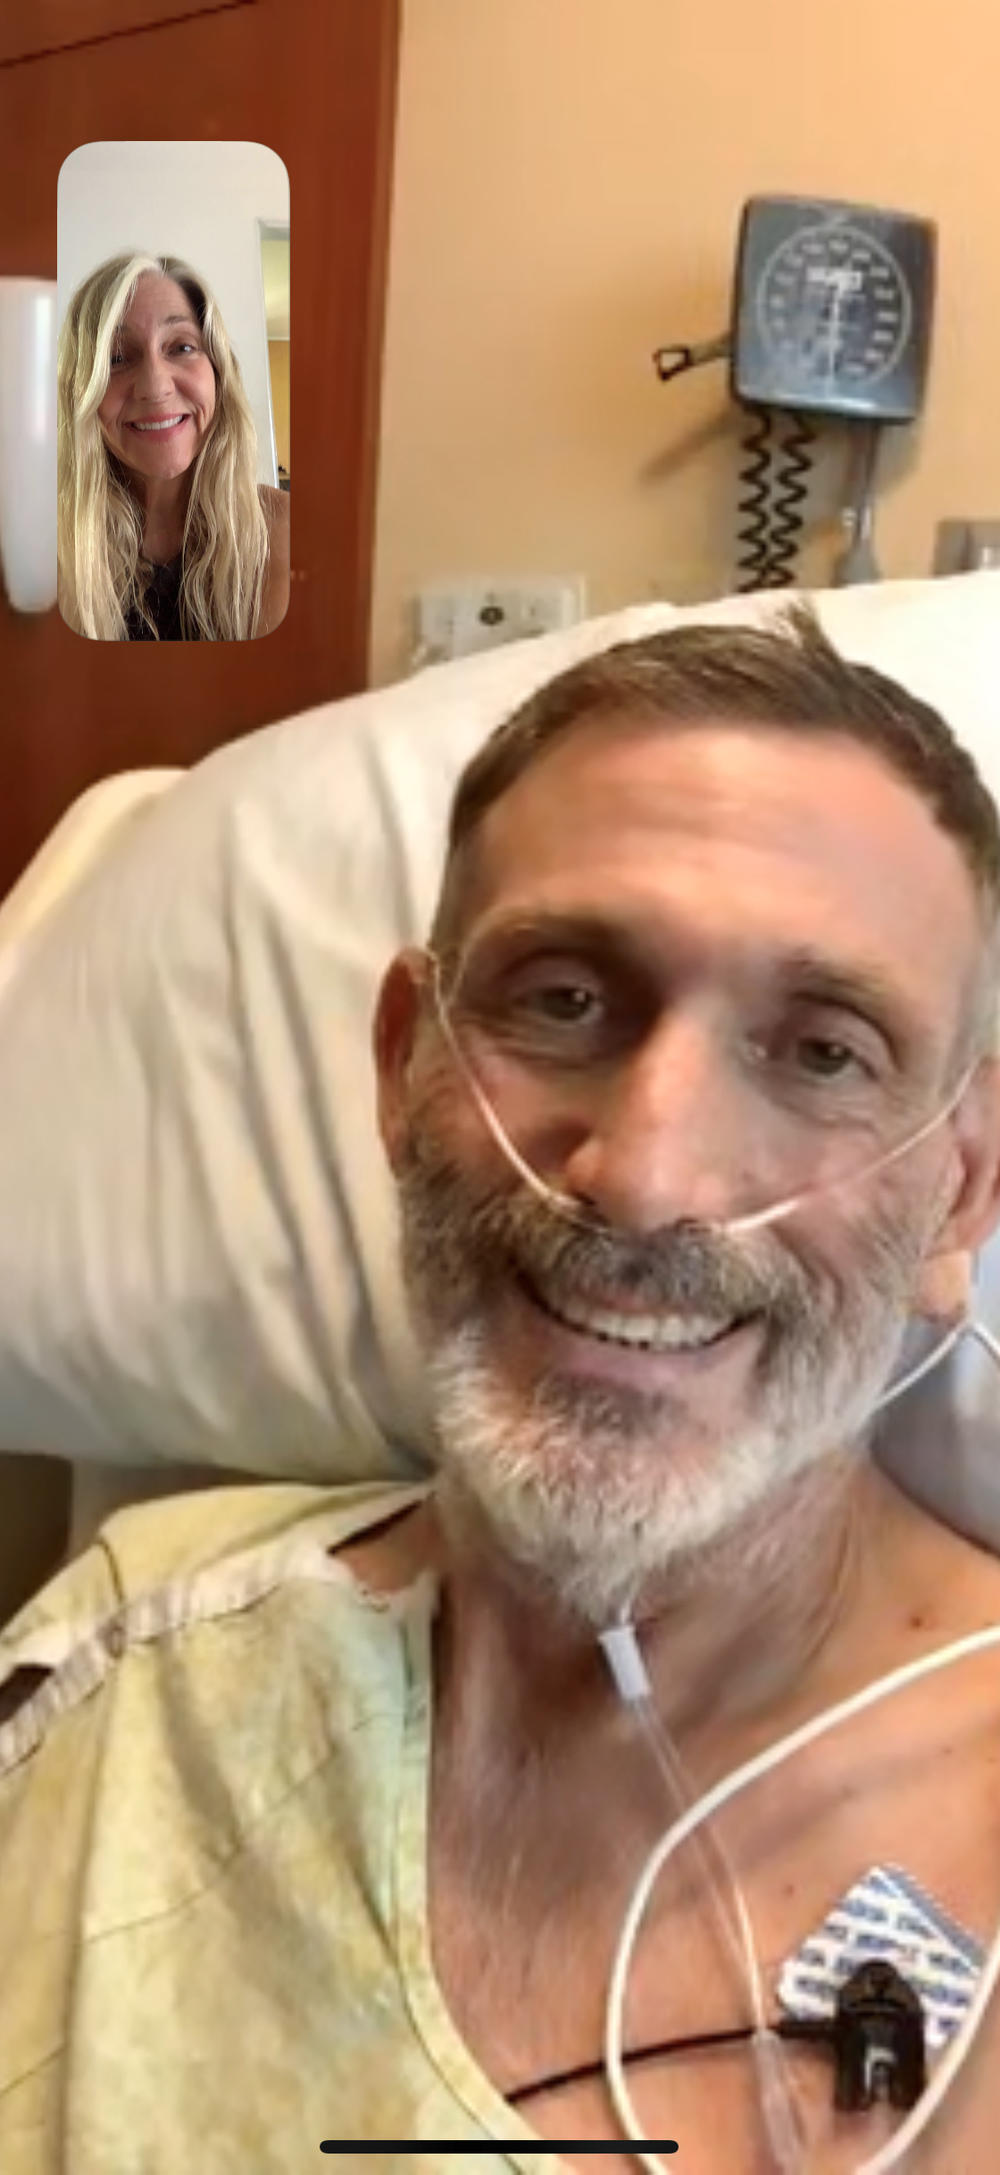 Don Ramsayer and his sister Melanie Ramsayer speak over FaceTime on August 30. He'd been off the ventilator for 10 days and was finally recovered enough from COVID-19 to be moved out of the ICU.